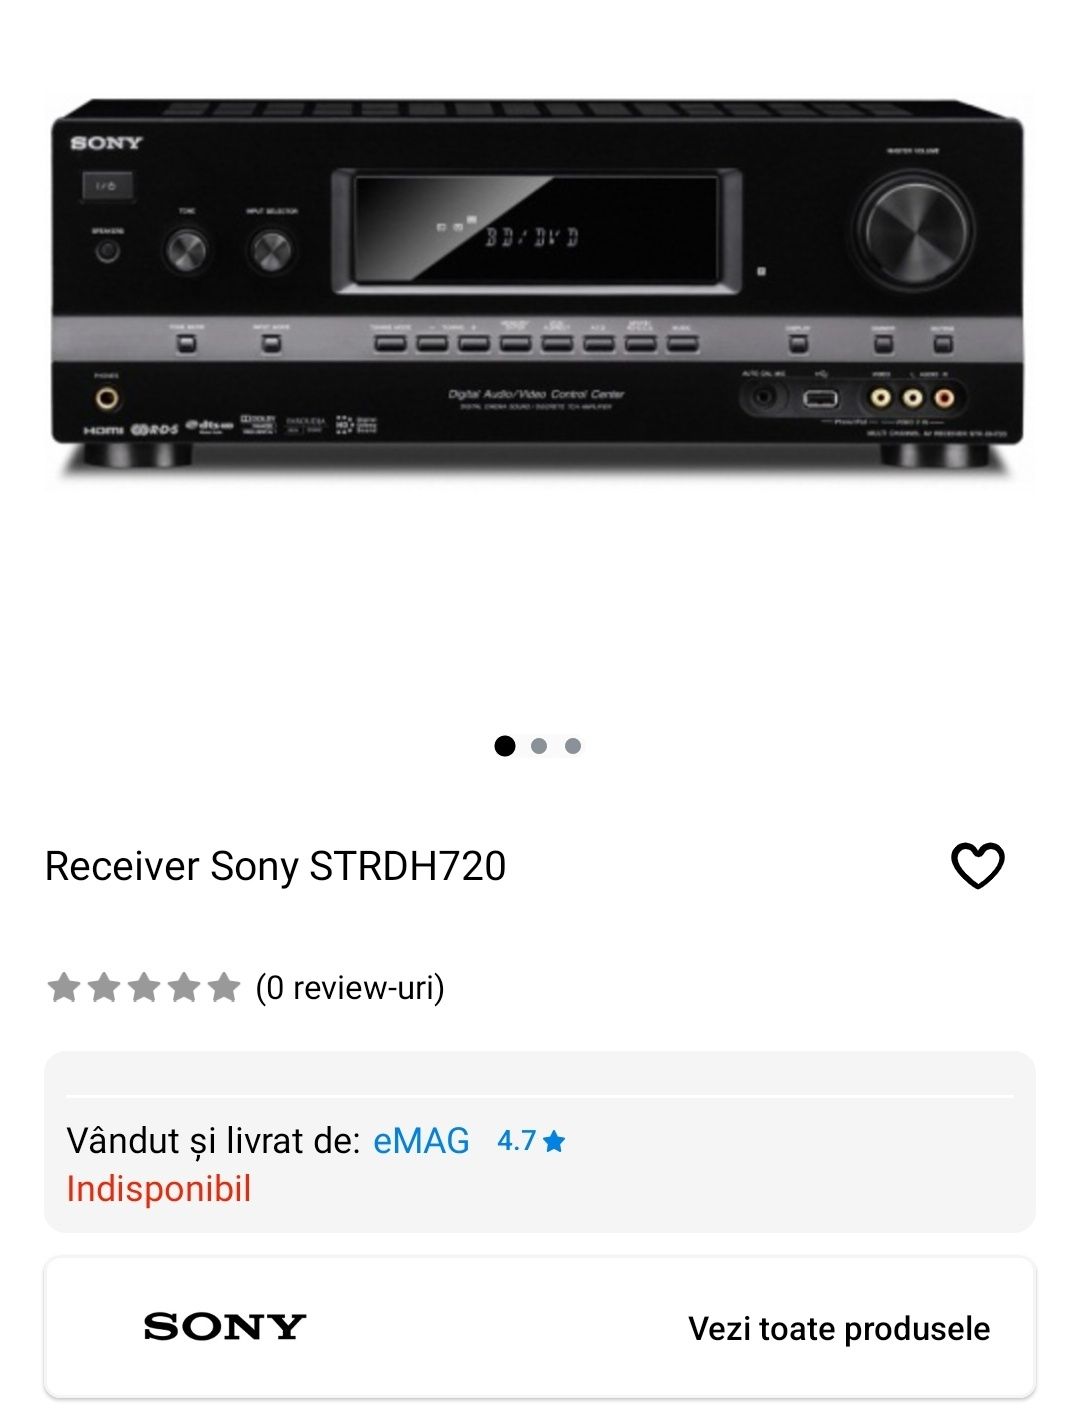 Vand amplificator /receiver SONY 7.1 STR DH-720 in stare perfecta 7x95